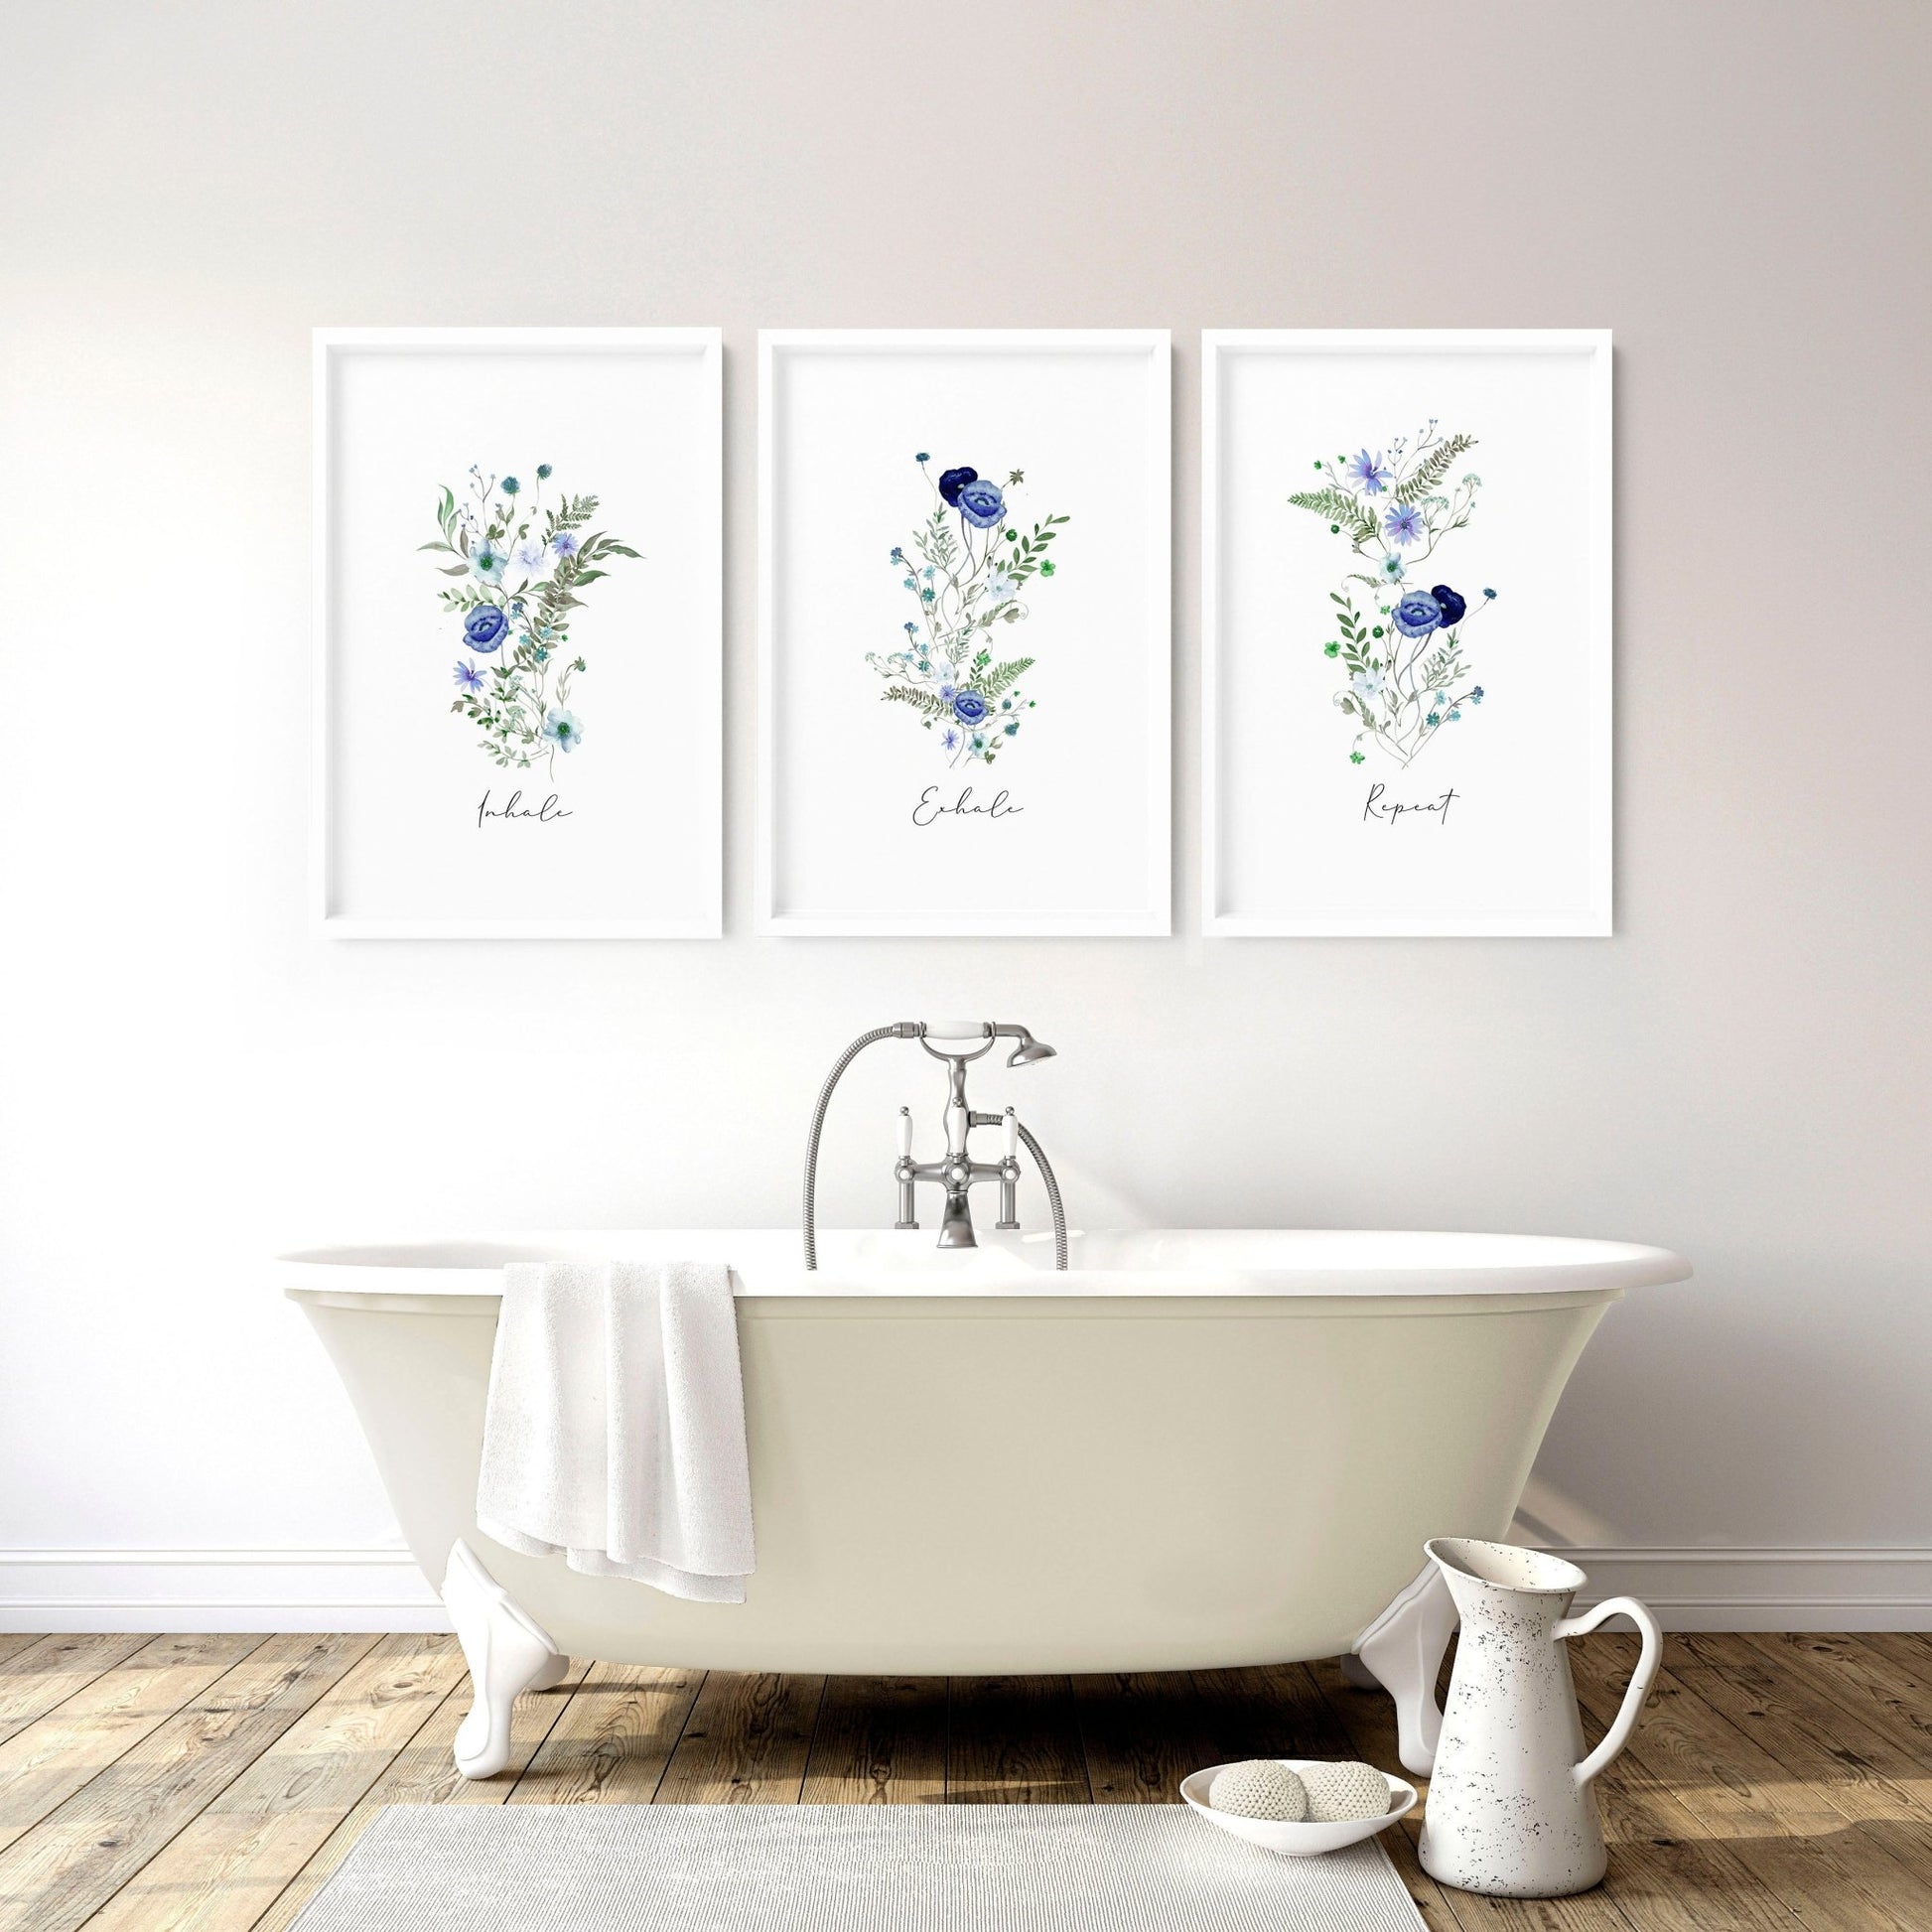 Shabby Chic art for bathroom walls | set of 3 wall art - About Wall Art